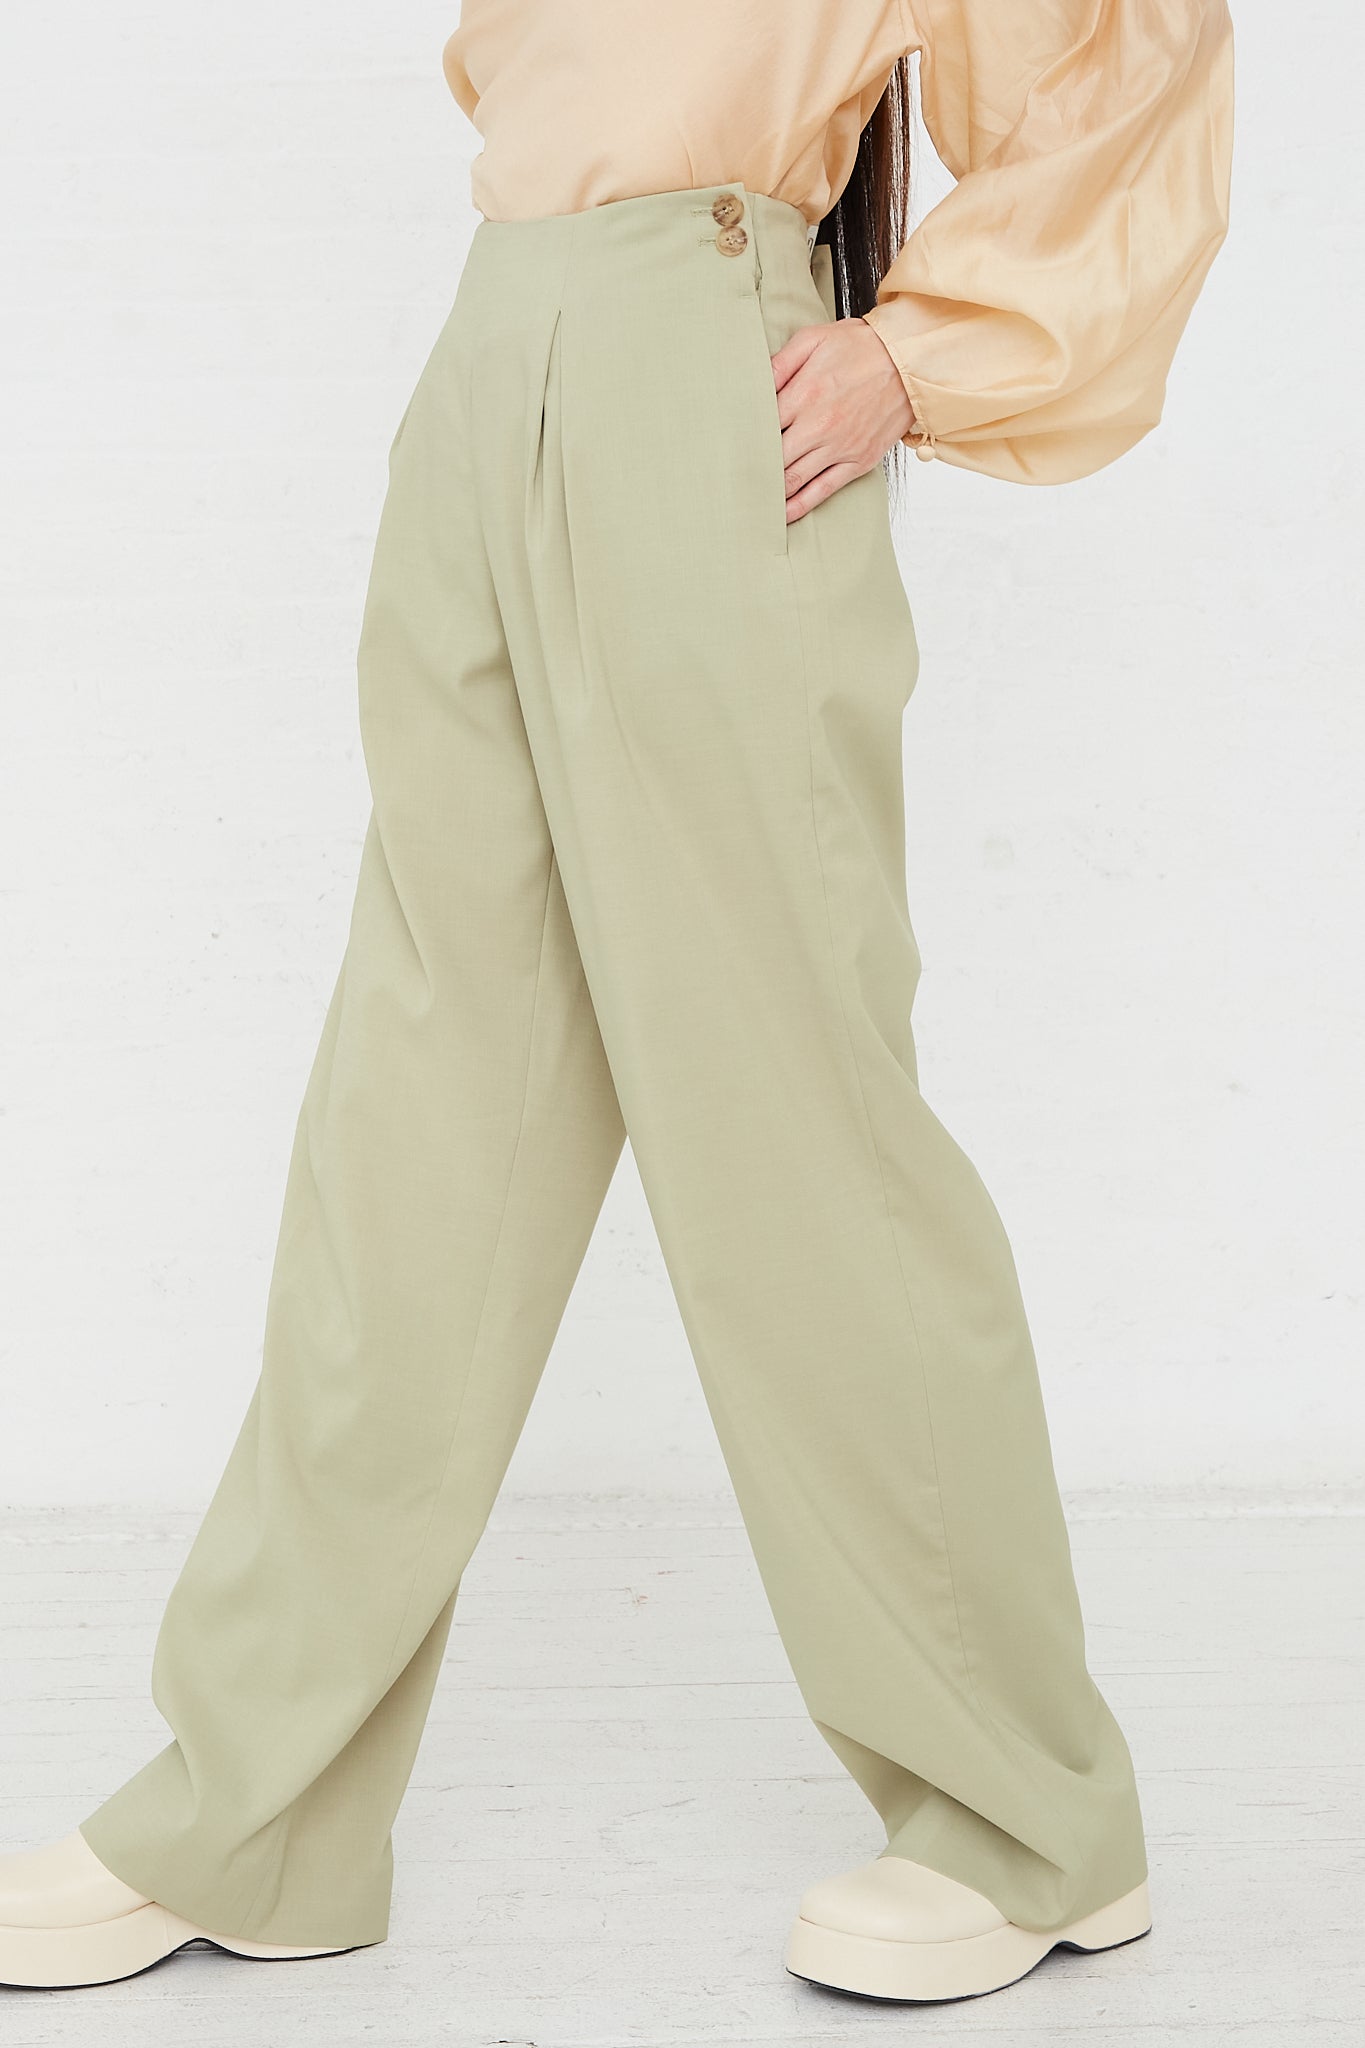 The model is wearing Rejina Pyo's Reine Trouser in Sage. Side view and full length.